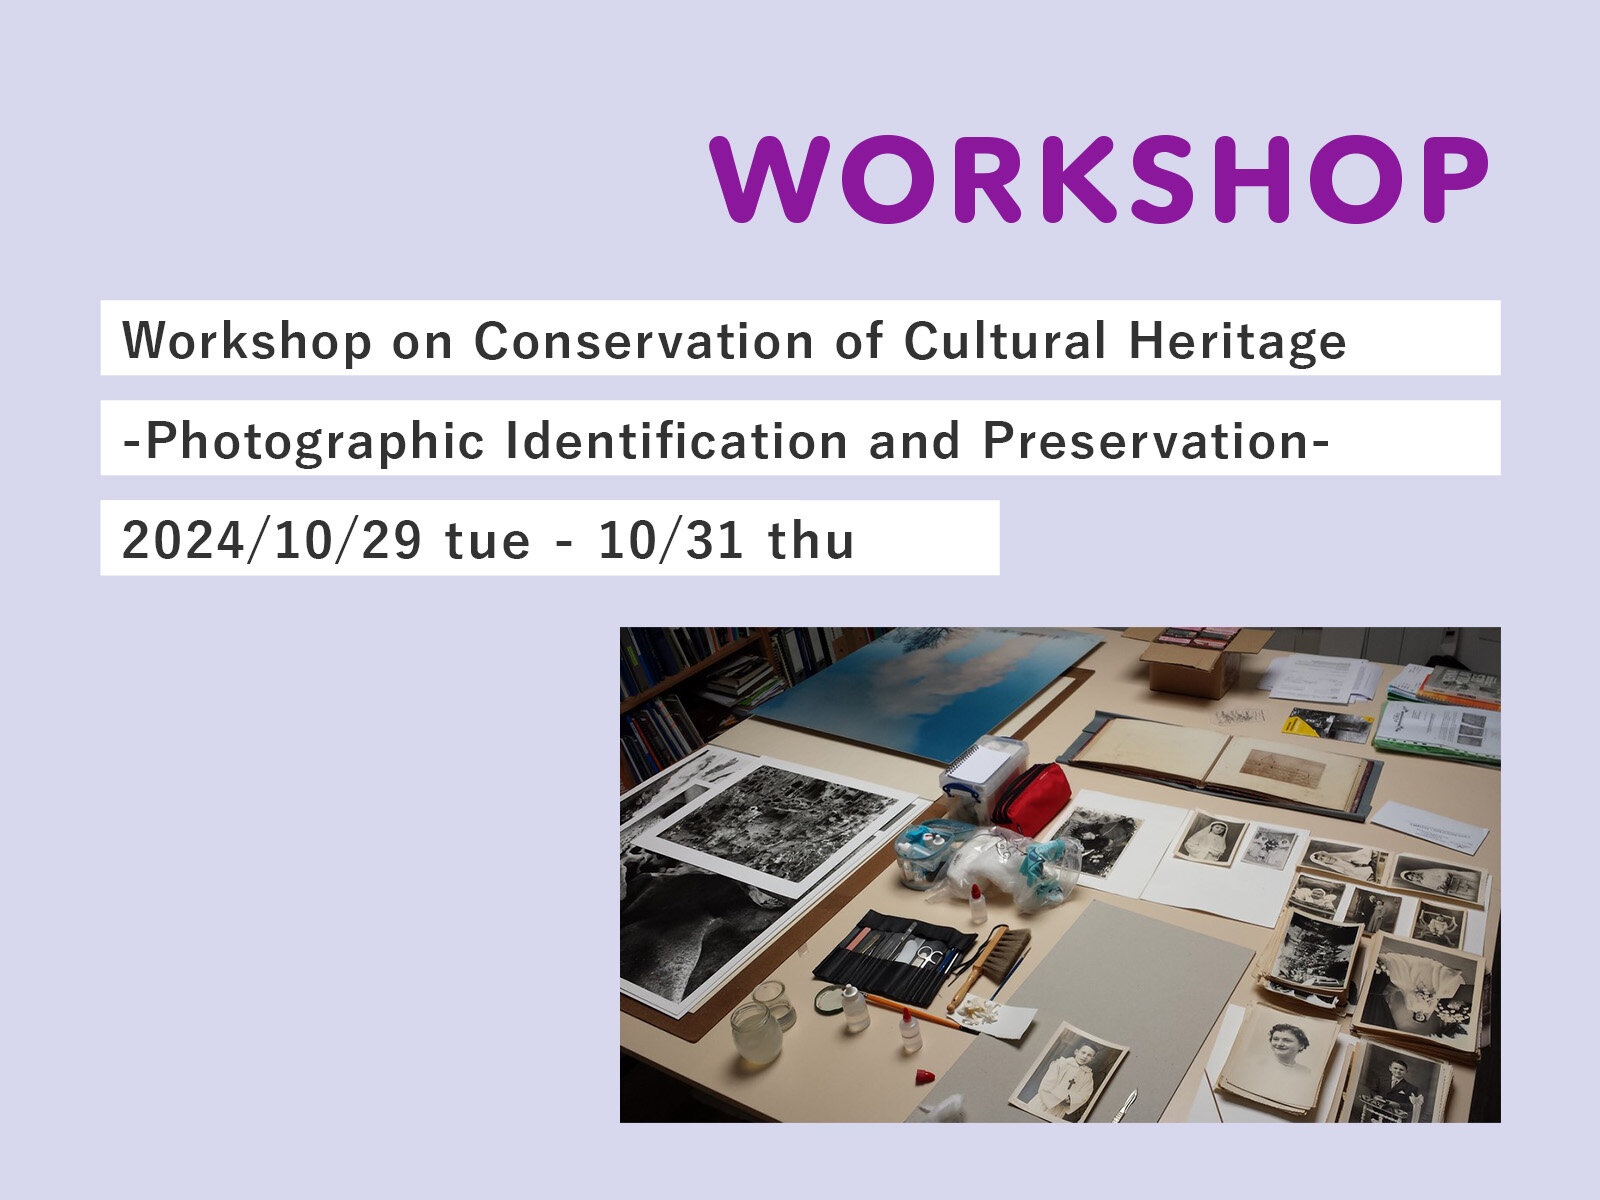 Workshop on Conservation of Cultural Heritage - Photographic Identification and Preservation -

